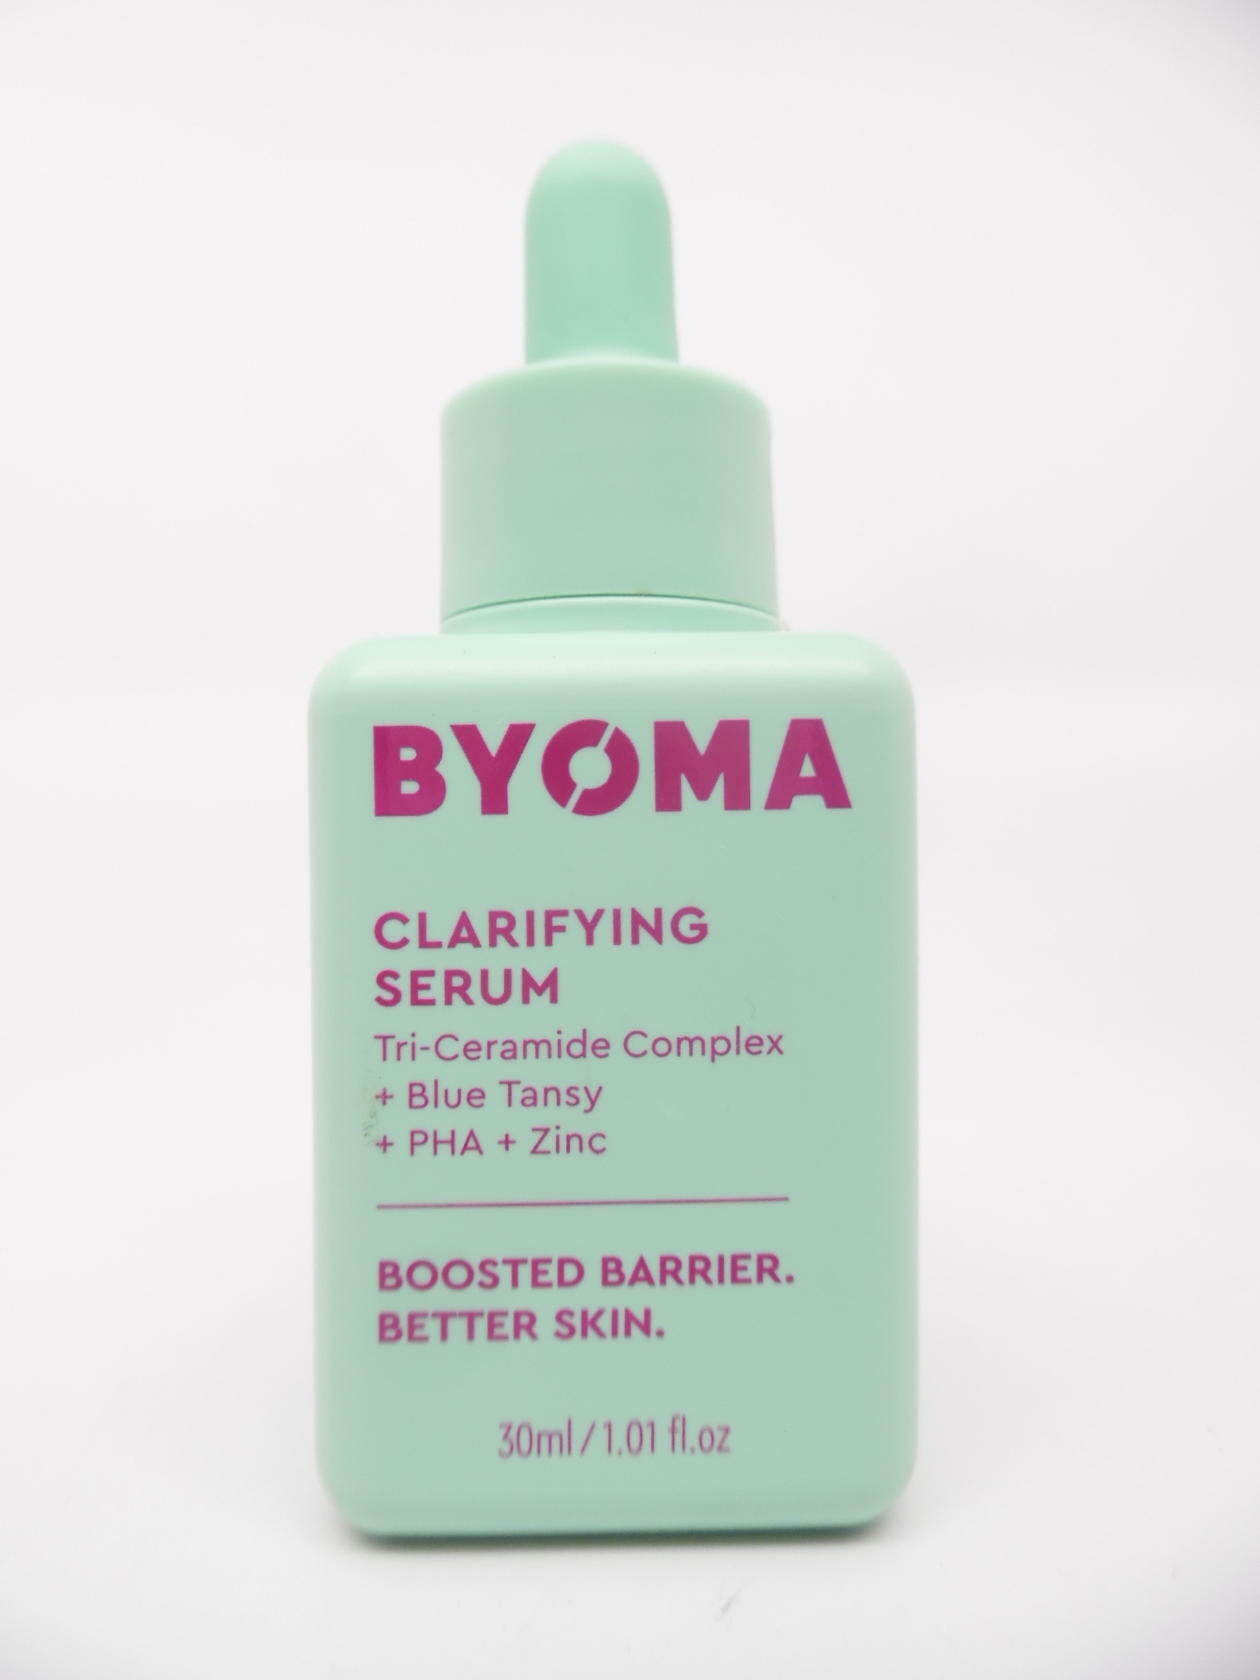 Byoma Skincare Gives You Glowing Skin For Under £14